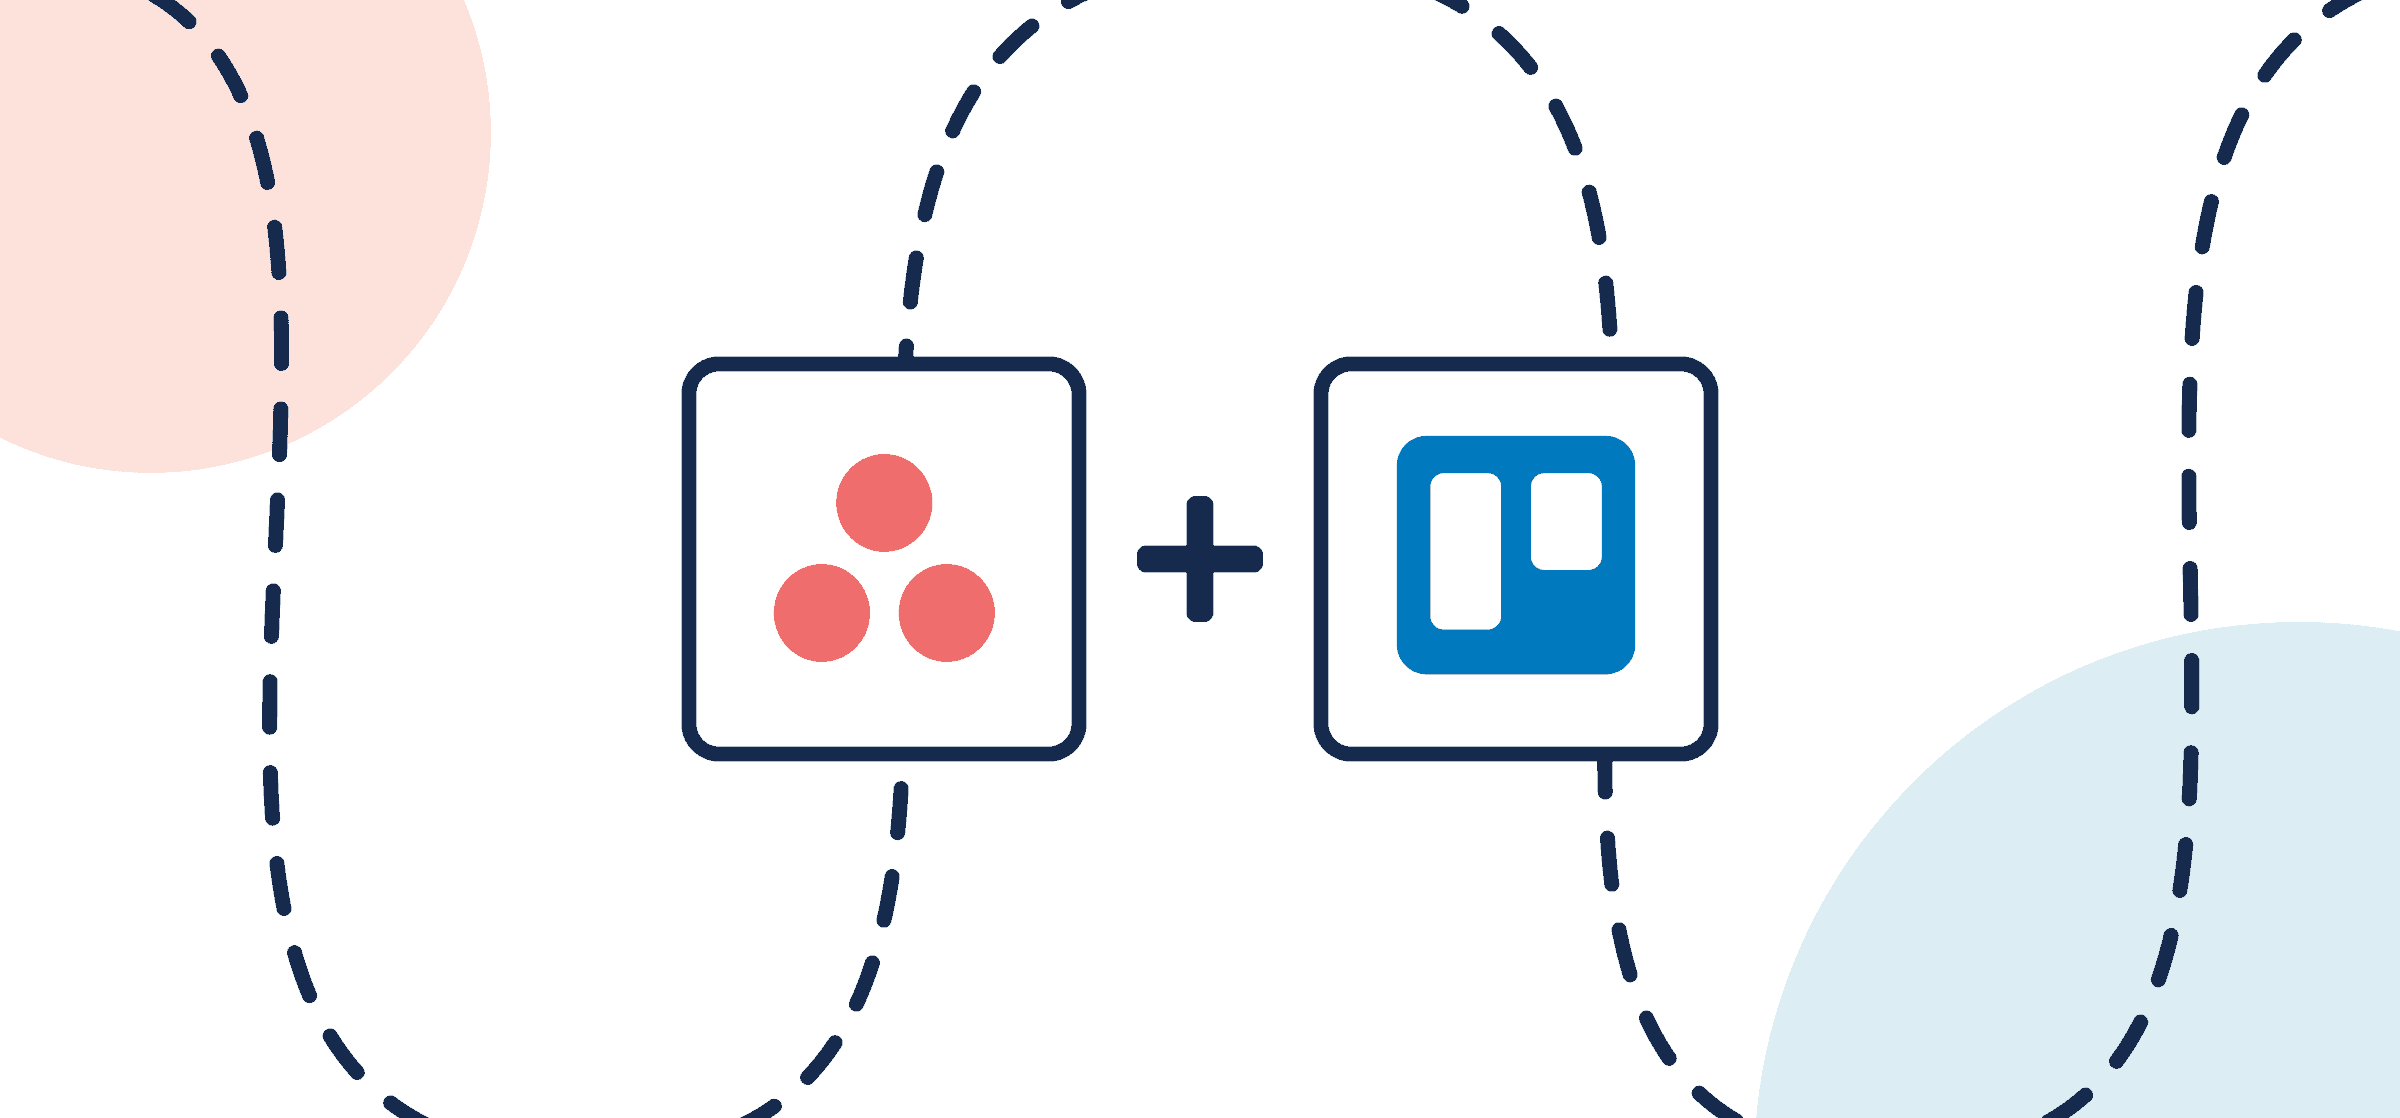 Featured image with Logos for Asana and Trello, representing Unito's guide to syncing Trello cards to Asana tasks with a 2-way integration.